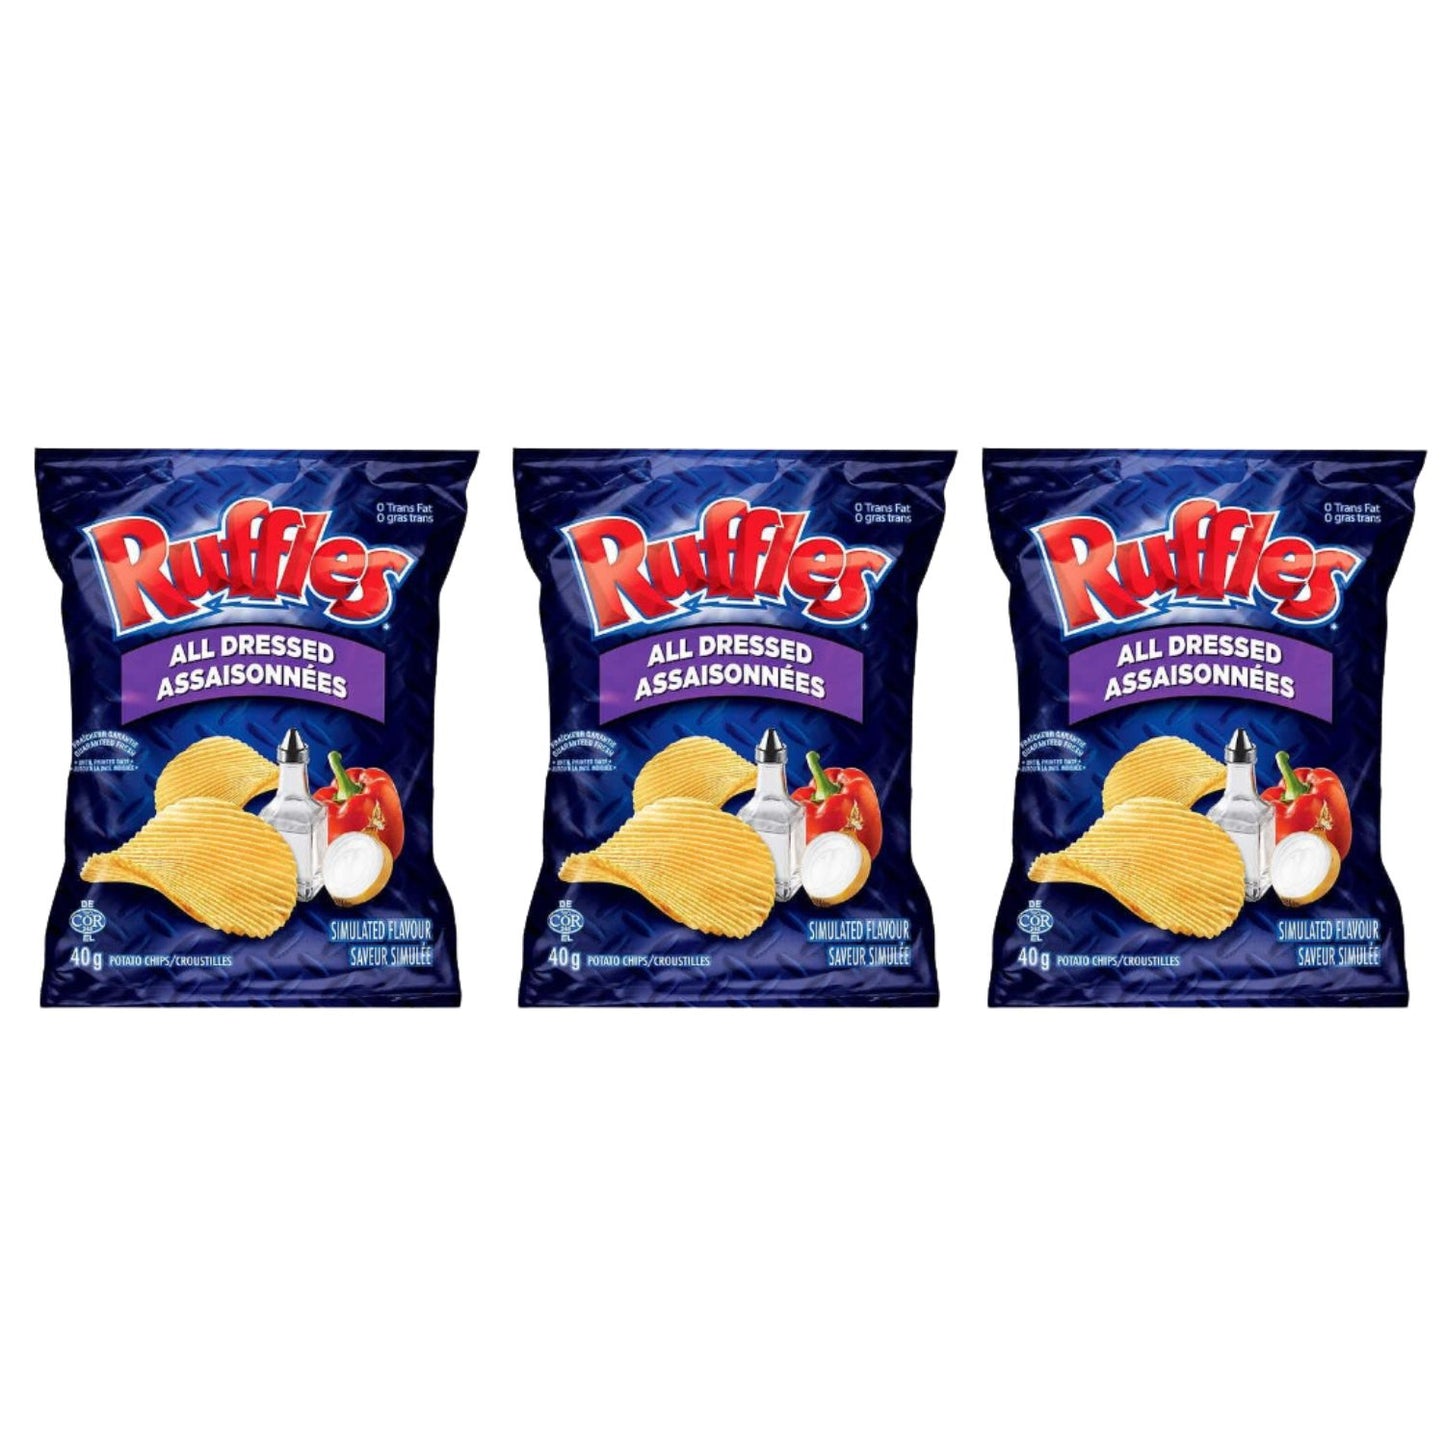 Ruffles All Dressed Chips Snack Bag pack of 3